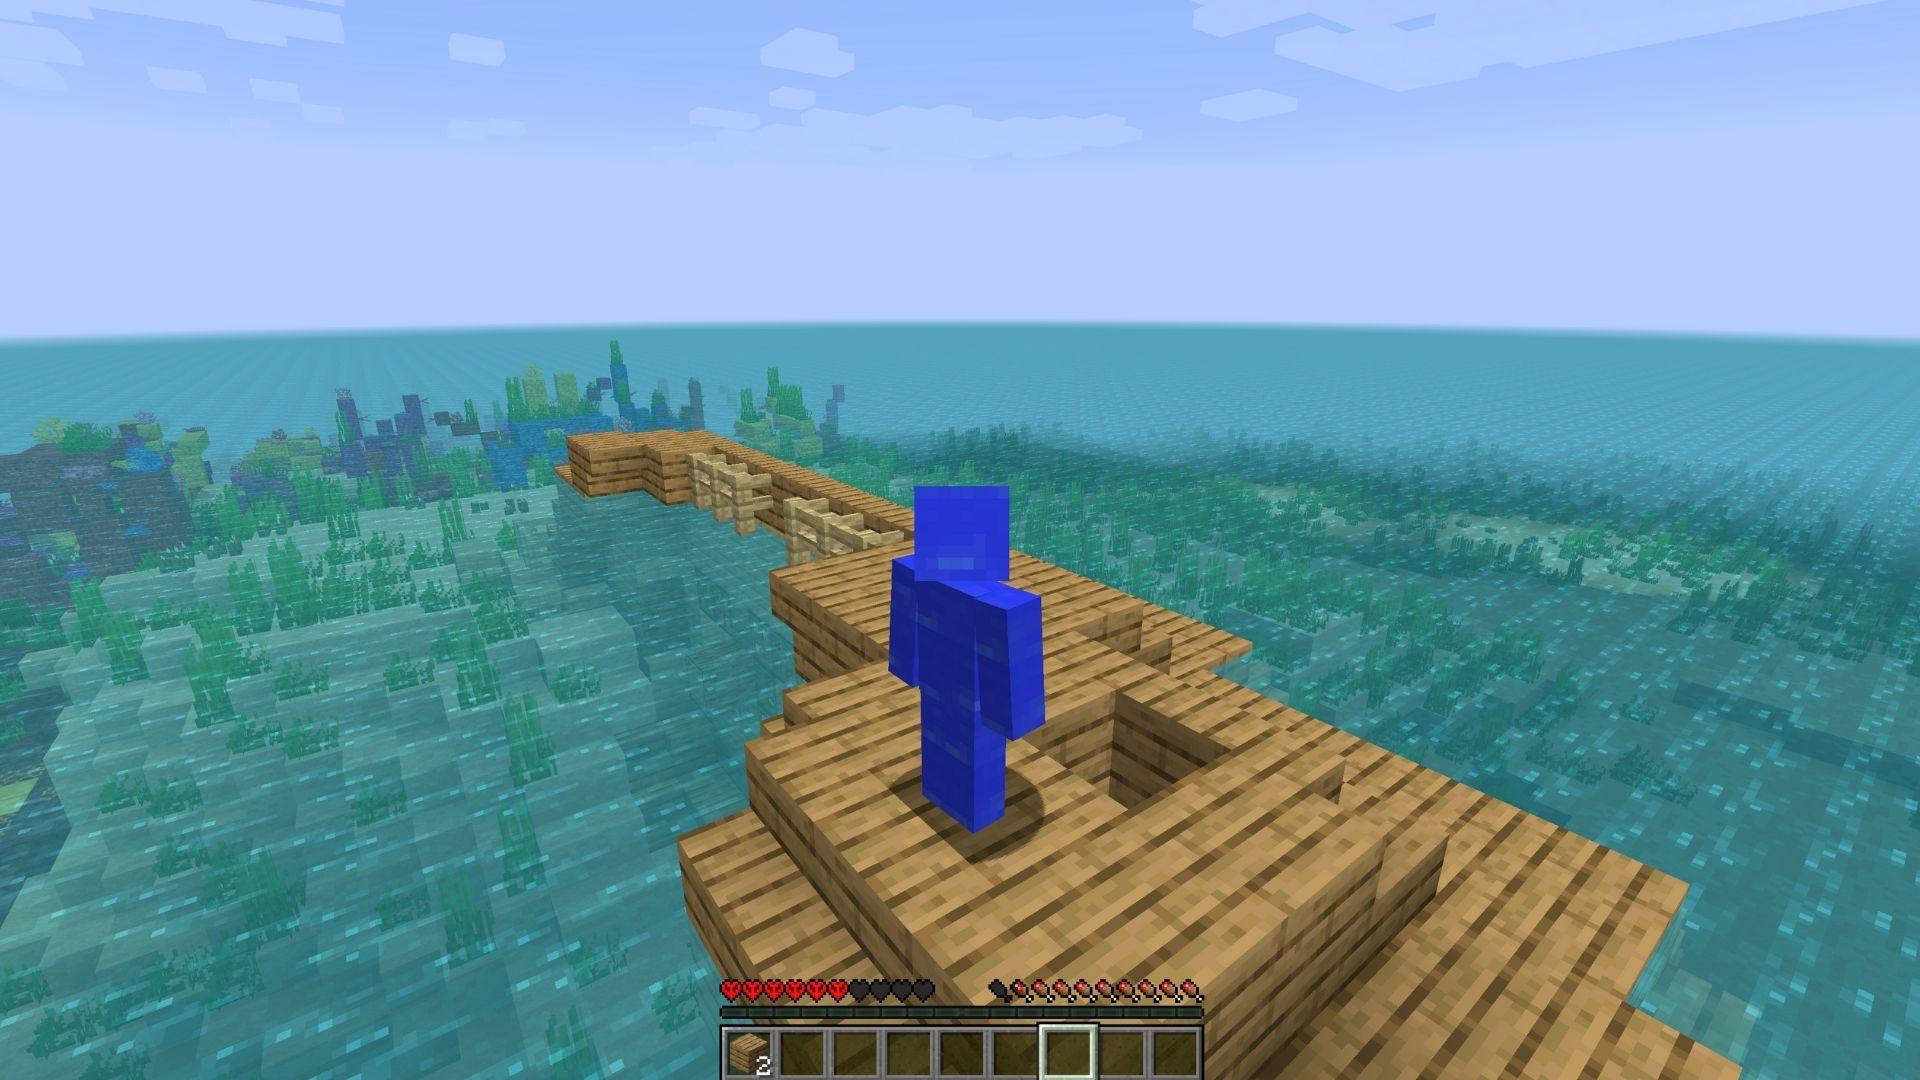 A Minecraft character in the middle of the Water World map